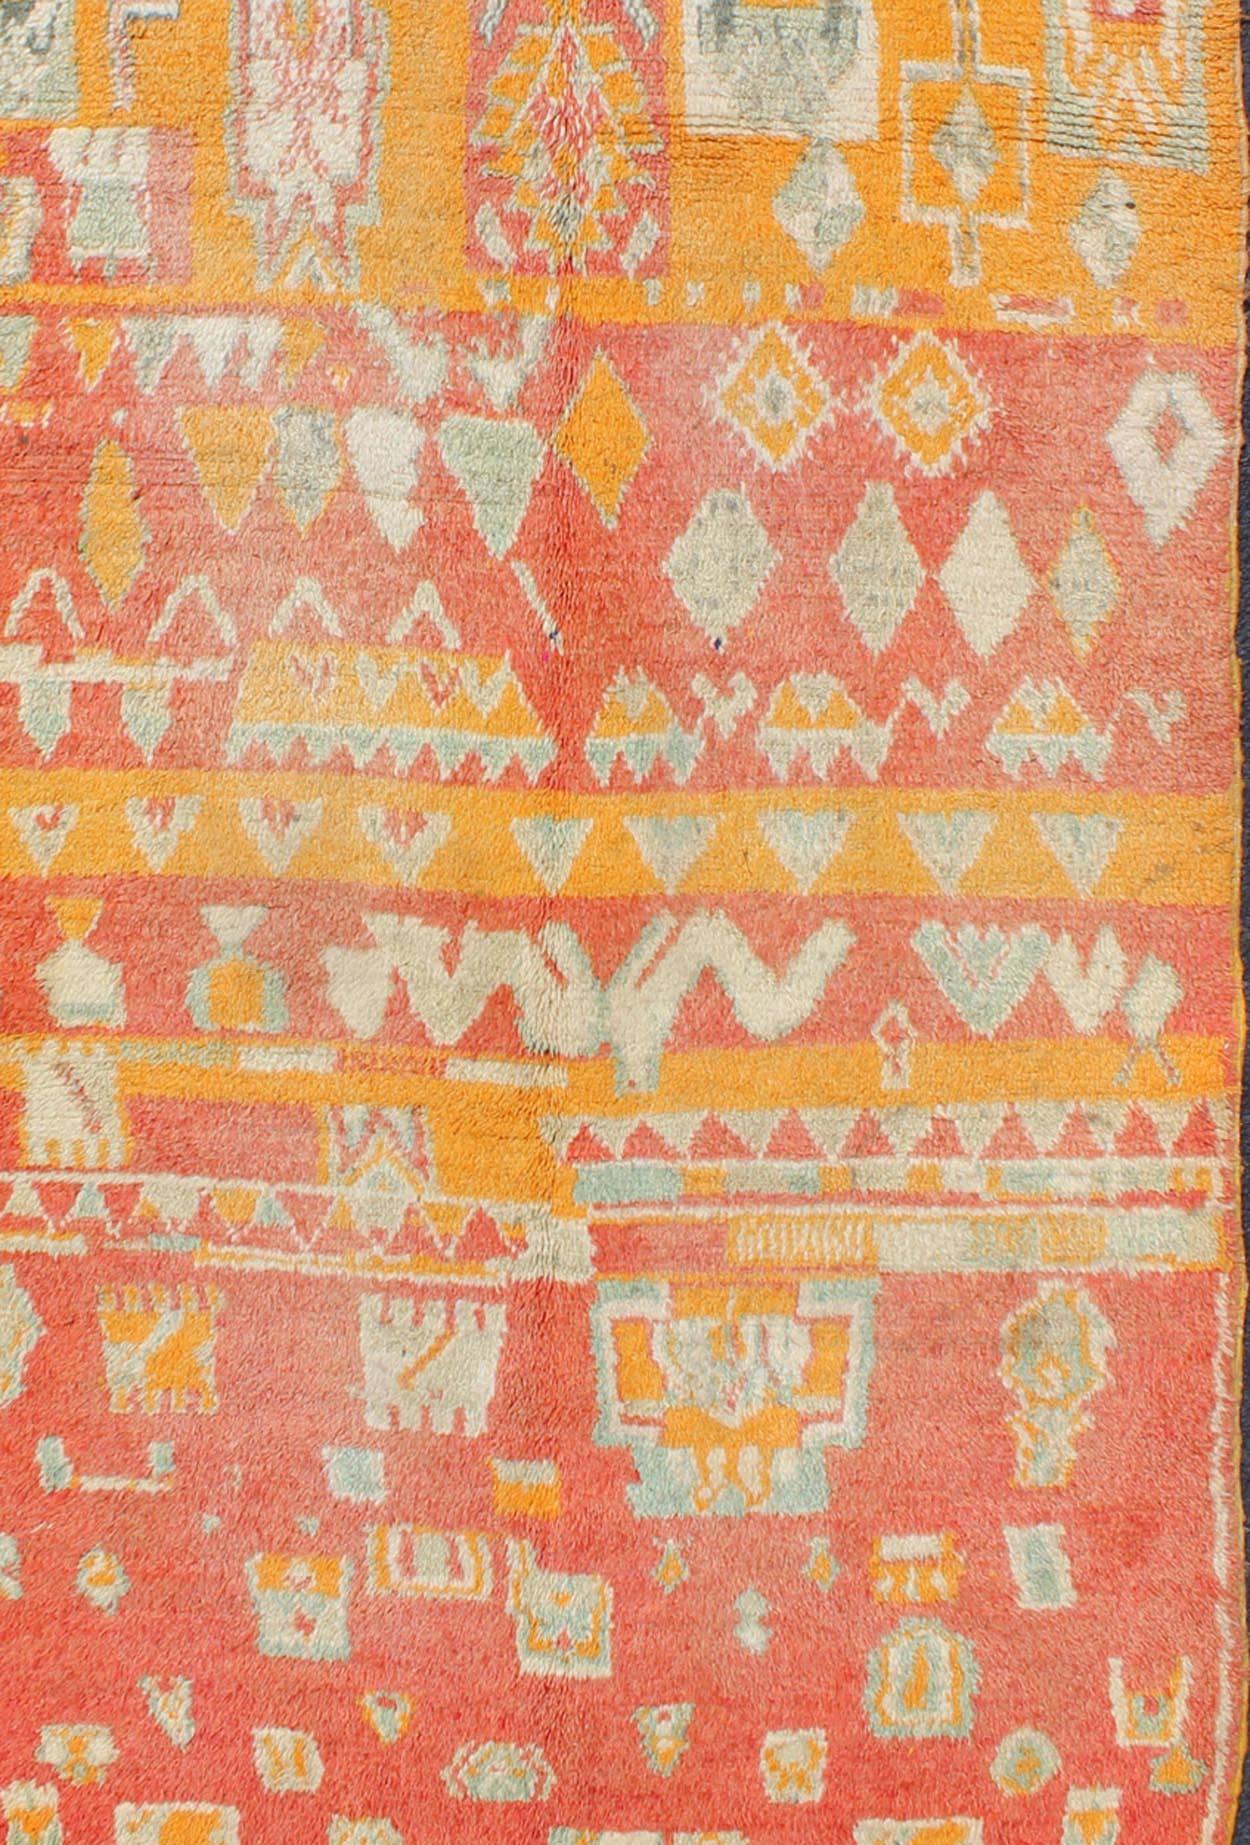 Tribal Design Vintage Moroccan Rug in Orange, Red, Mint Green and Ivory In Good Condition For Sale In Atlanta, GA